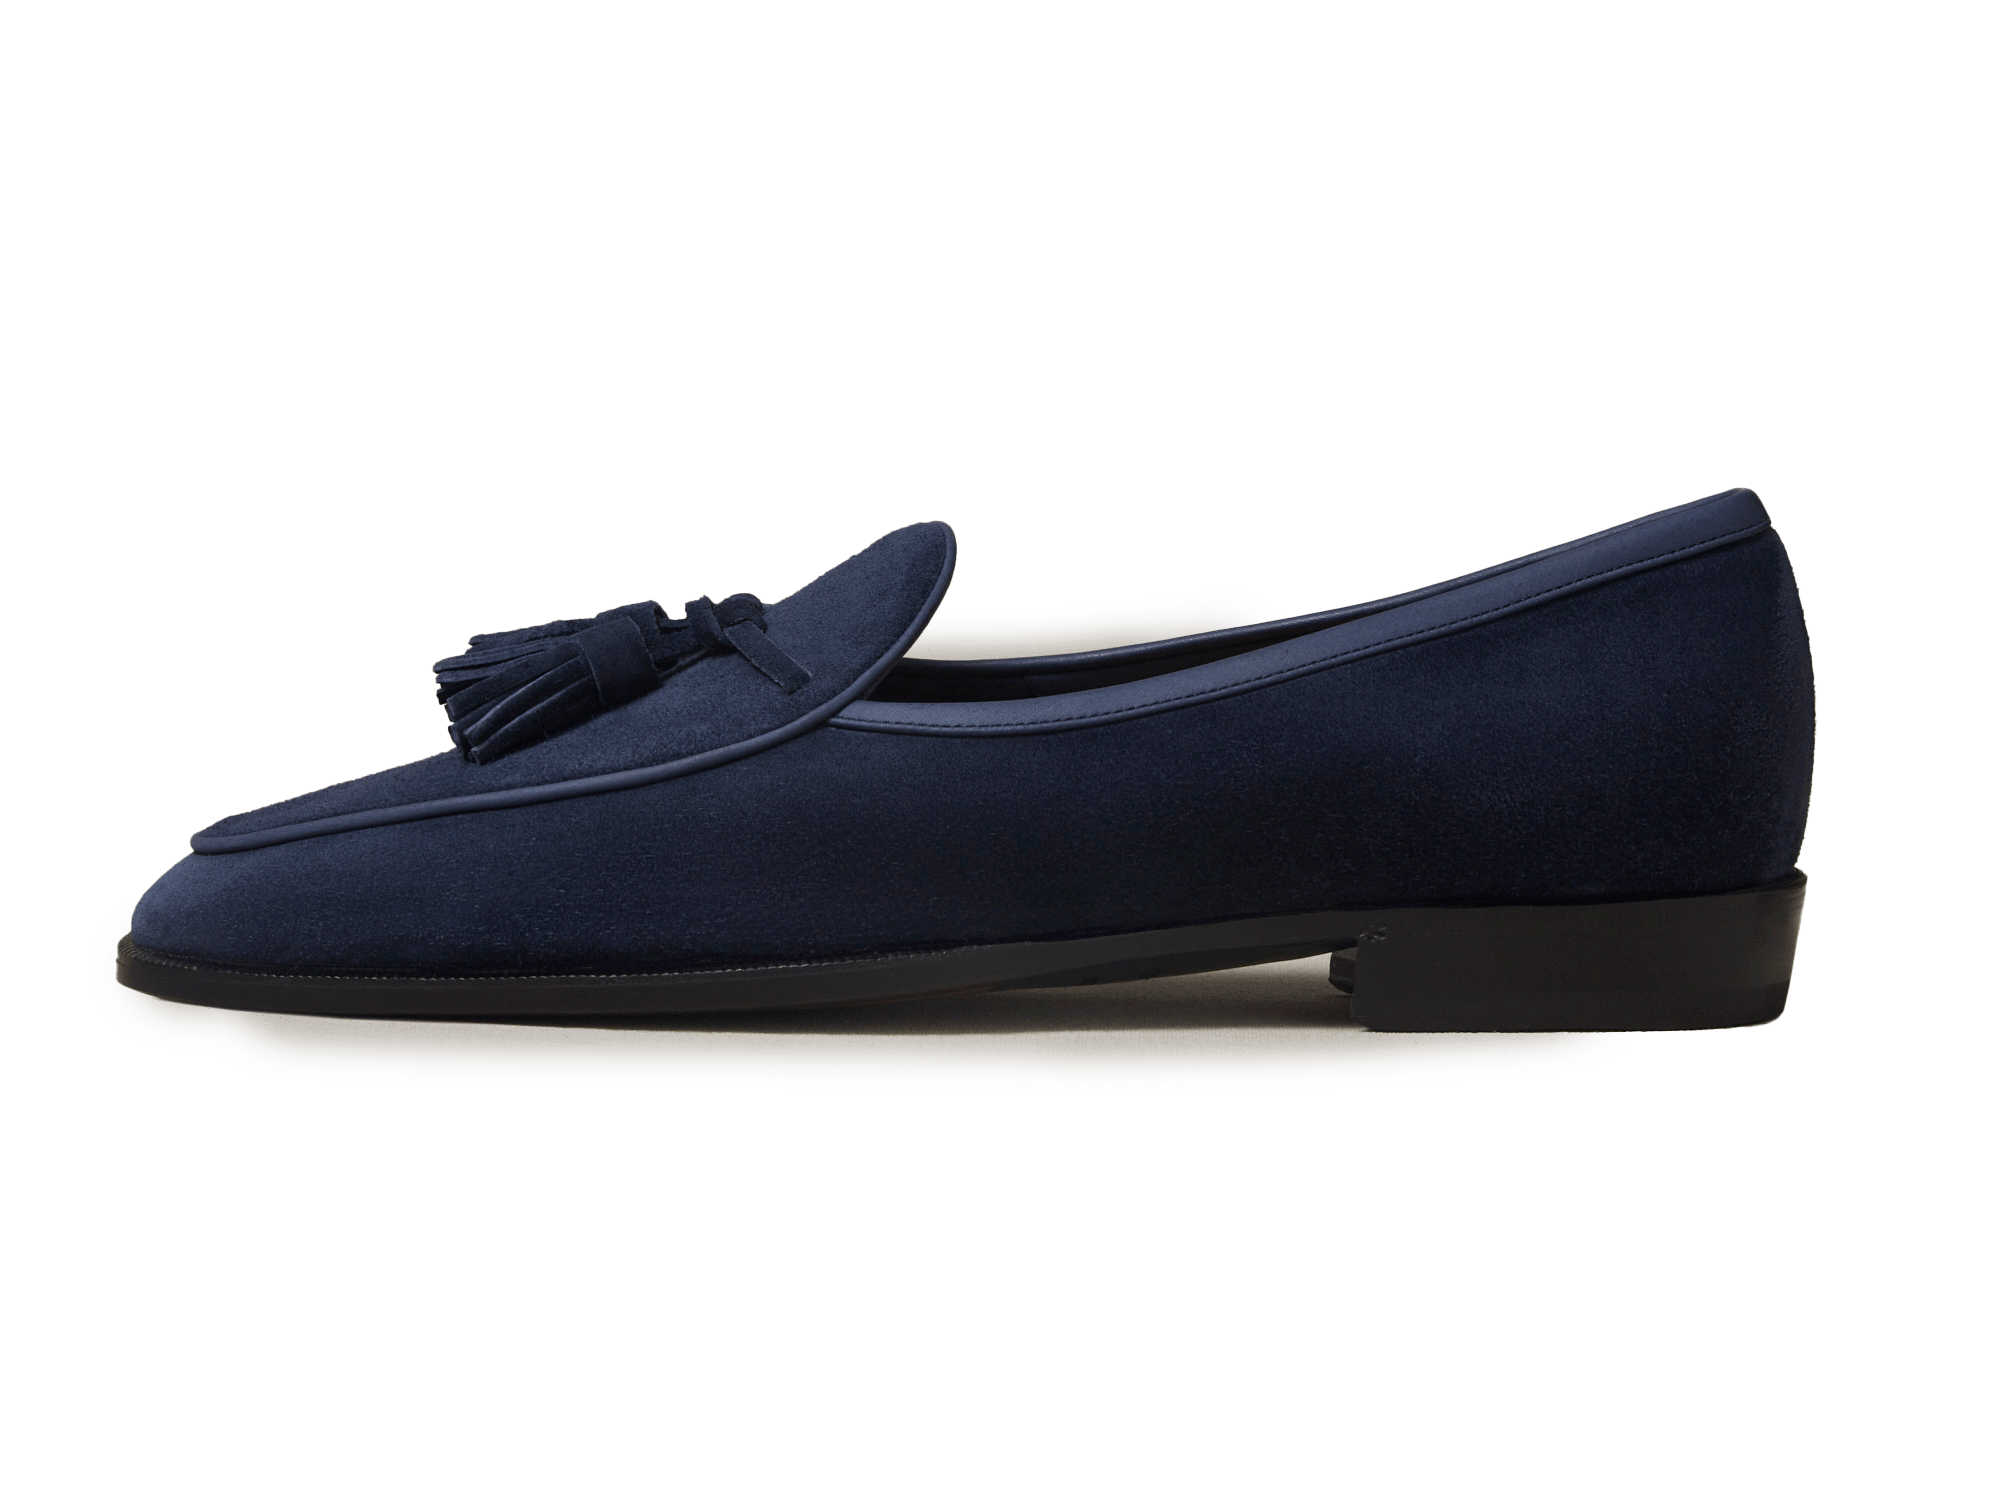 Grand Seine Tassel Loafers in French Navy Noble Suede